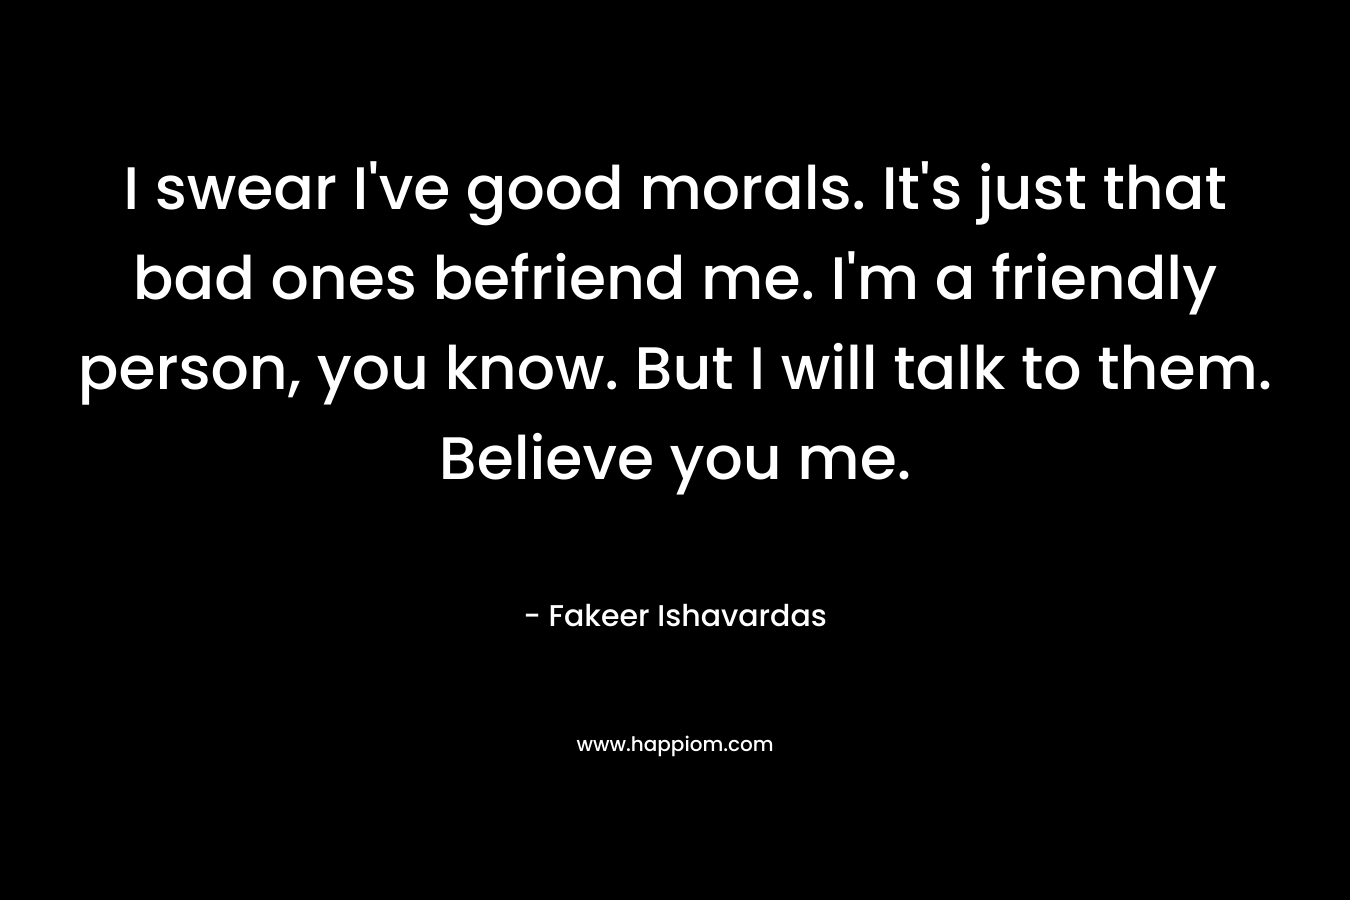 I swear I’ve good morals. It’s just that bad ones befriend me. I’m a friendly person, you know. But I will talk to them. Believe you me. – Fakeer Ishavardas